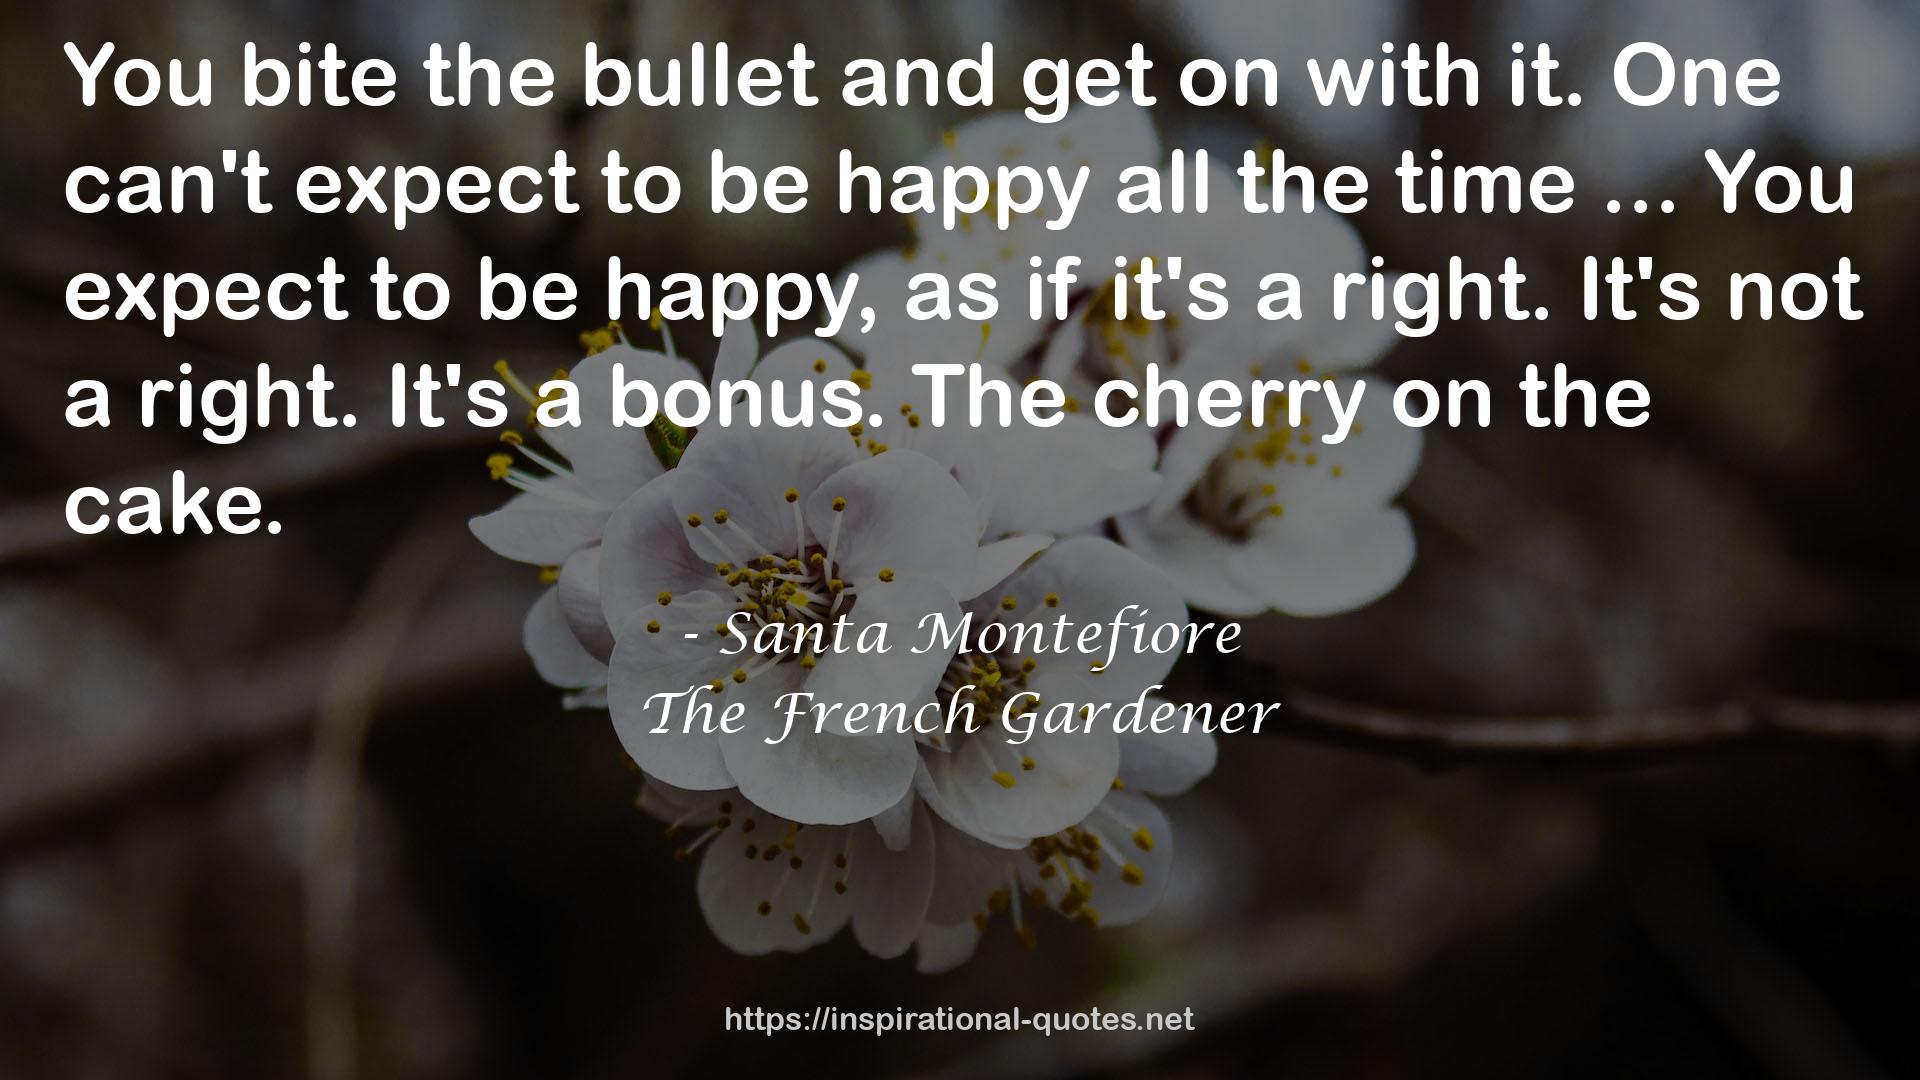 The French Gardener QUOTES